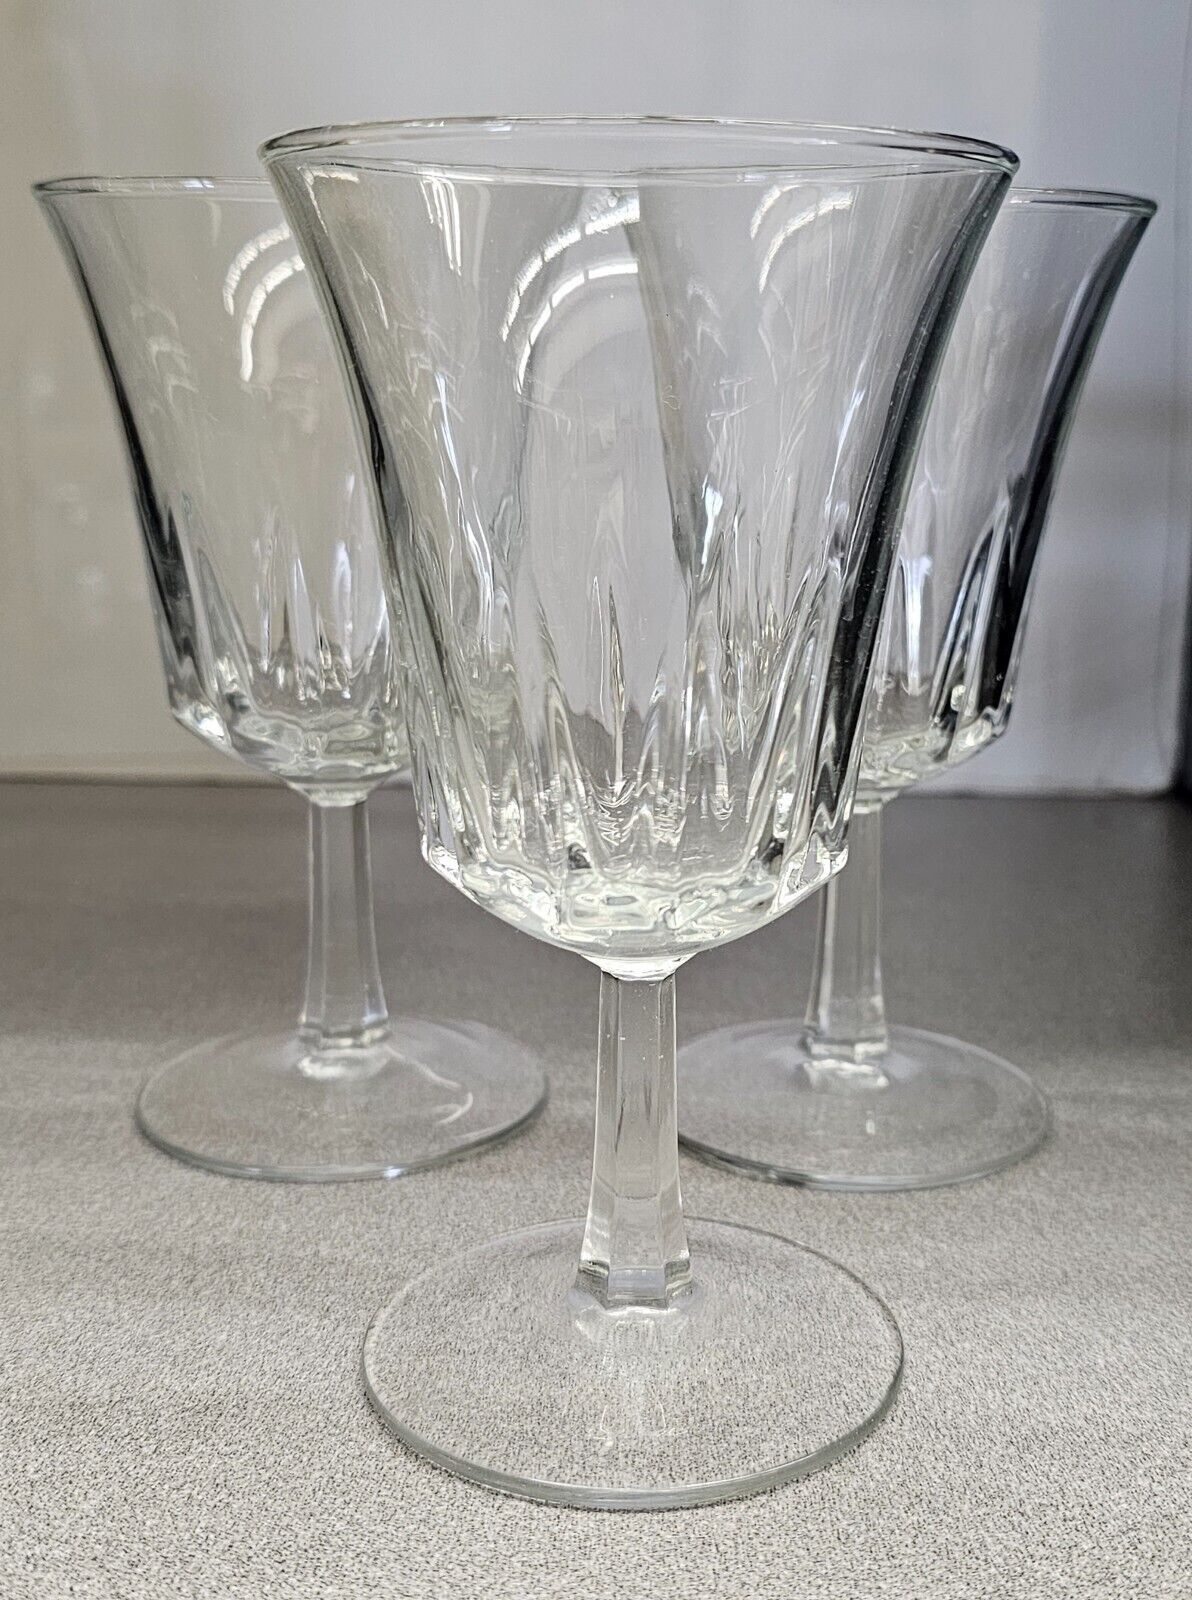 Primary image for Vintage Clear Crystal Footed Wine Glasses Made in France Set of 3